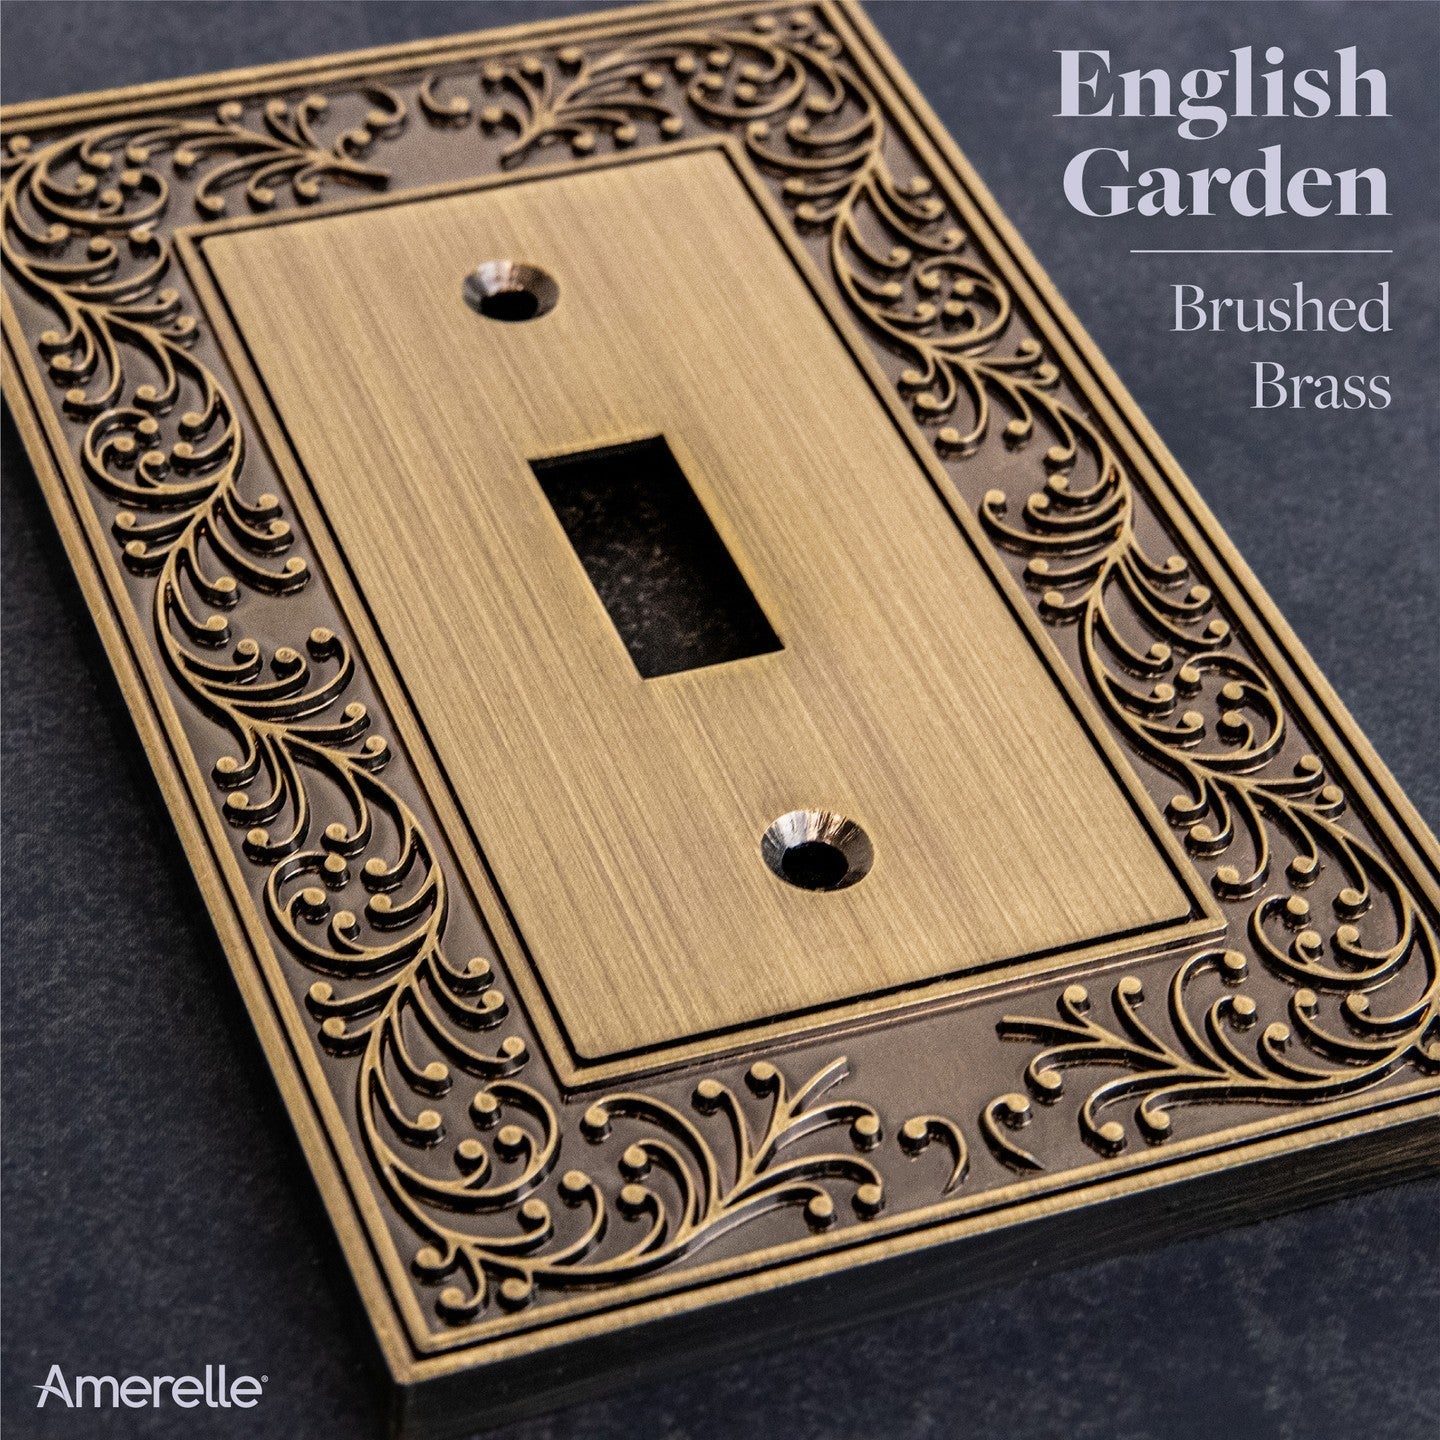 English Garden Brushed Brass Cast - 1 Toggle Wallplate